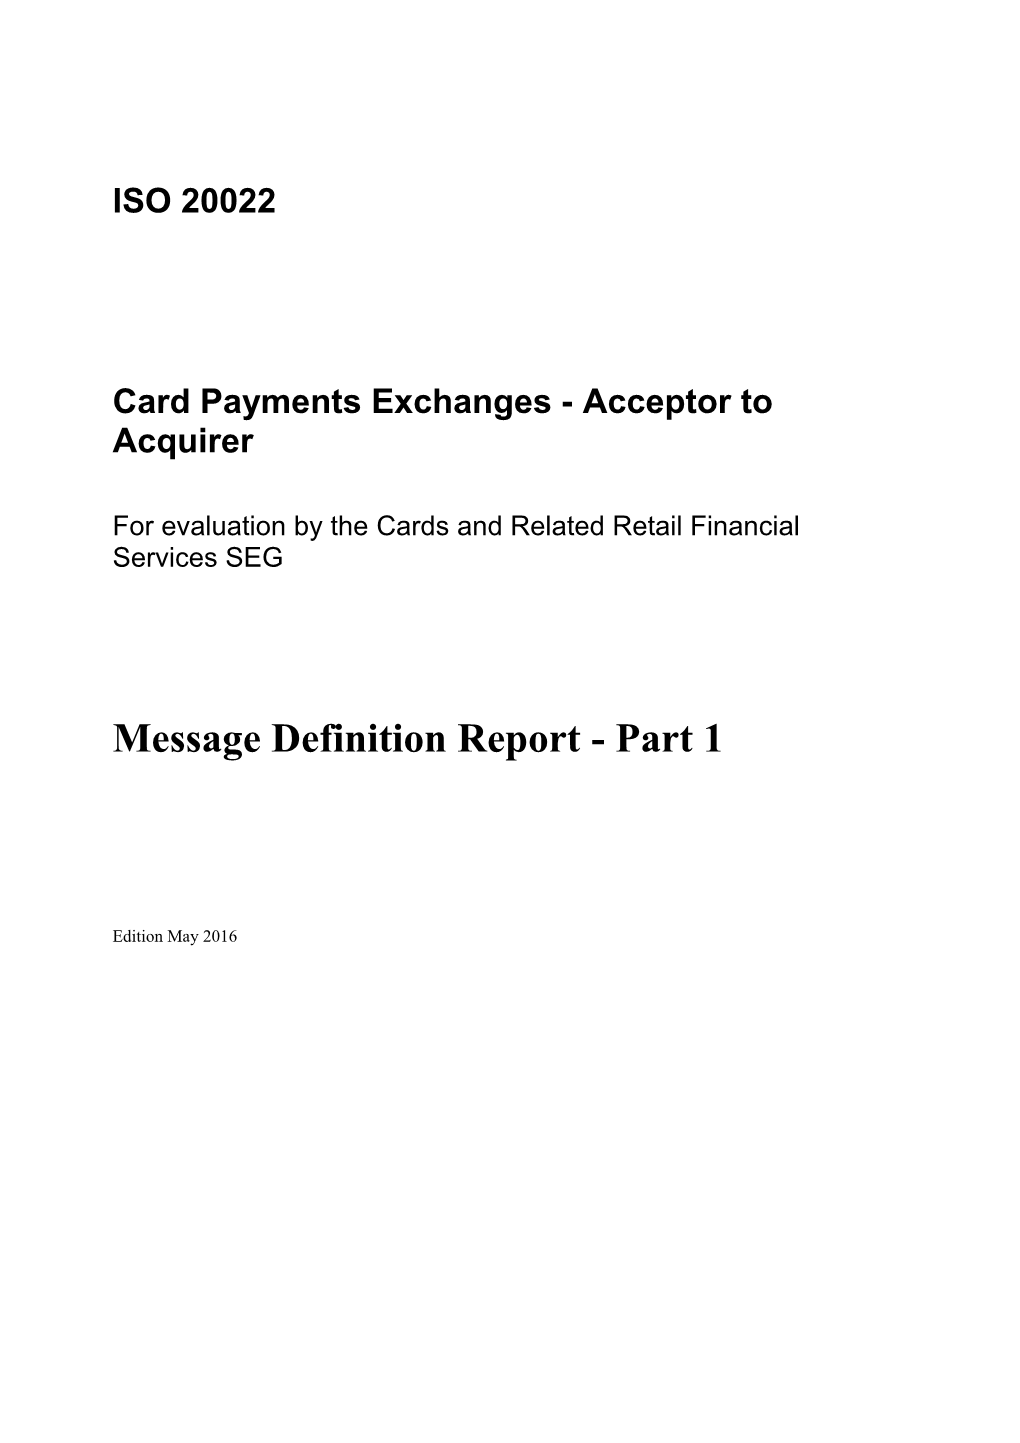 For Evaluation by the Cards and Related Retail Financial Servicesseg